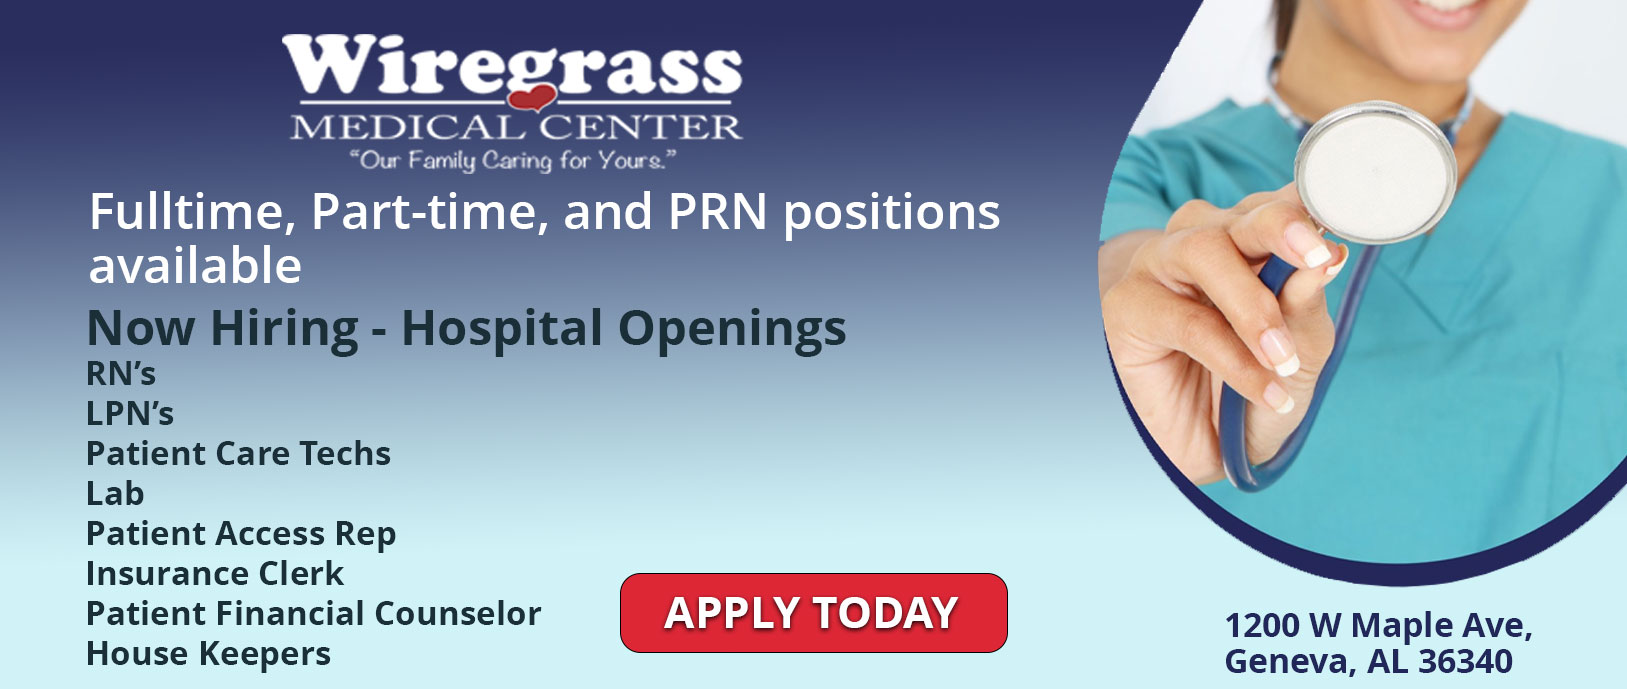 Banner picture of female Nurse holding a stethoscope up to the camera. Banner says:

Full-time, Part-time, and PRN positions available 
Now Hiring- Hospital Openings
RN's
LPN's
Patient Care Techs
Lab
Patient Access Rep
Insurance Clerk
Patient Financial Counselor
Housekeepers

1200 W Male Ave,
Geneva, AL 36340

(APPLY TODAY)